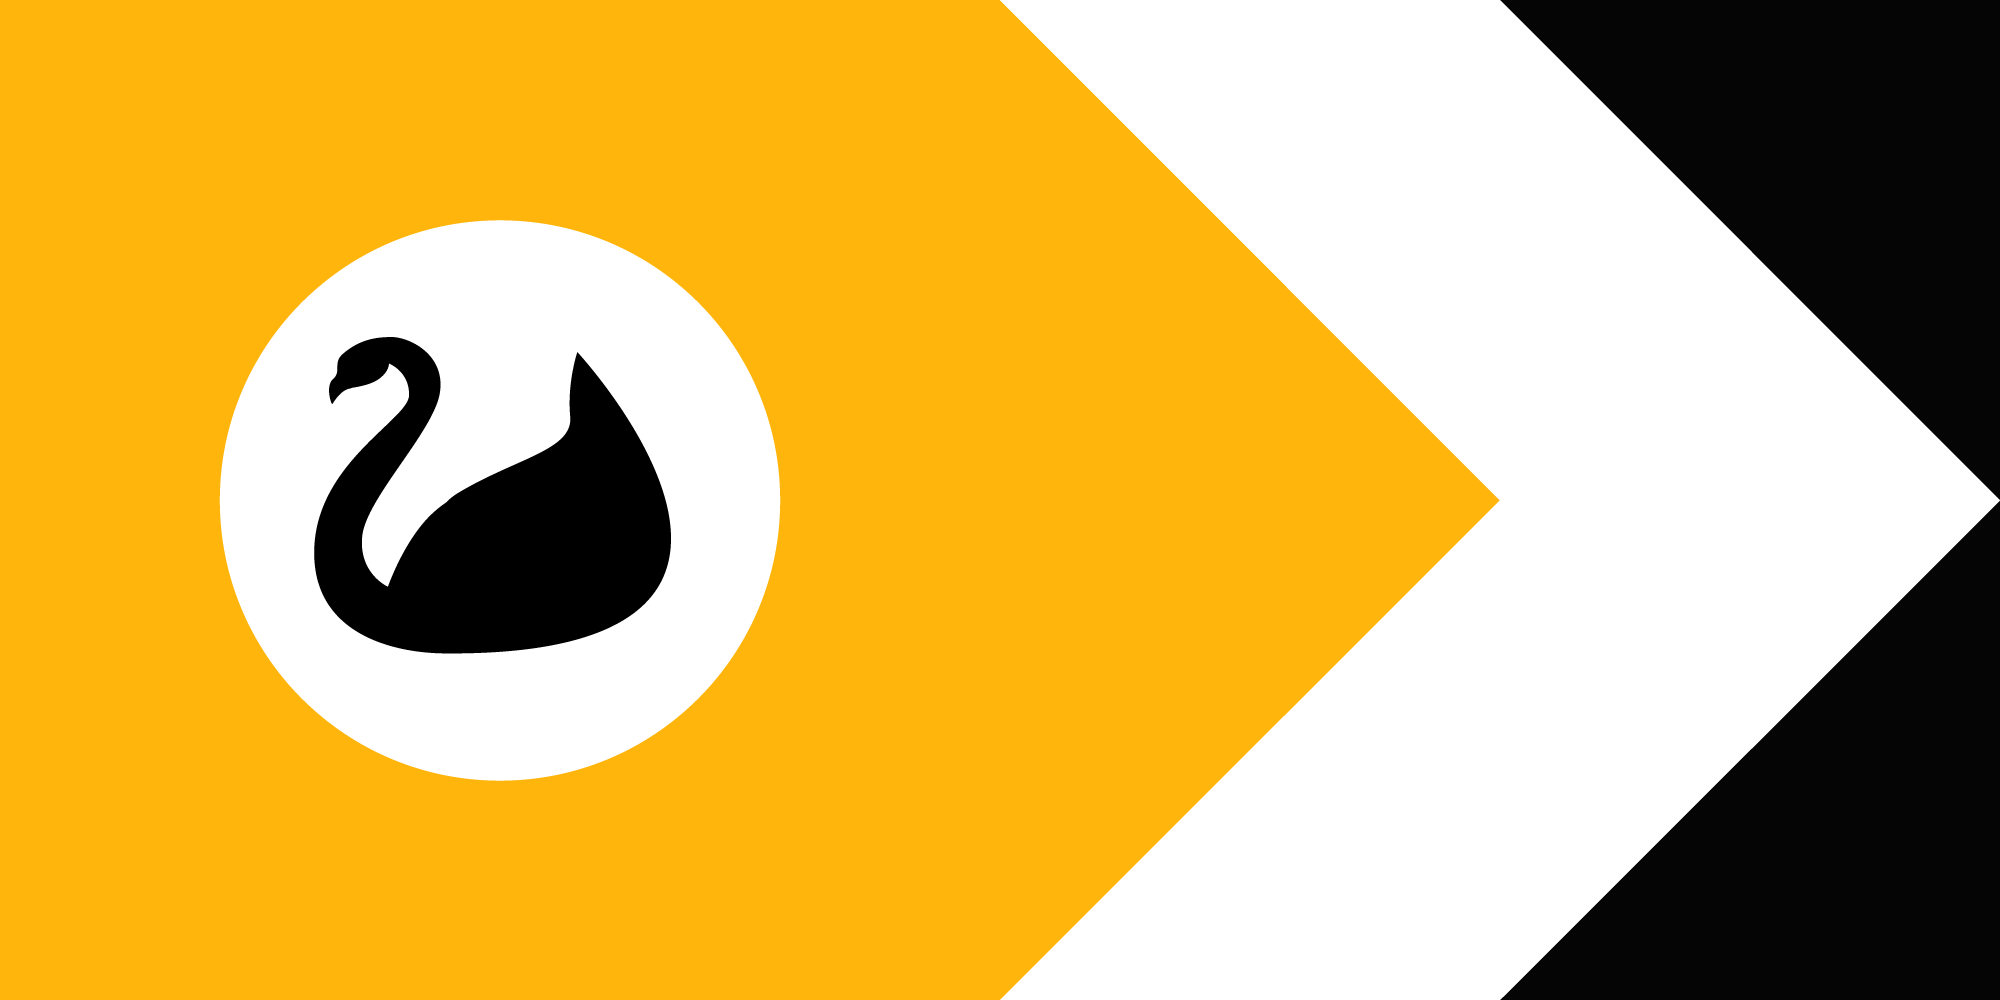 A state flag proposal for WA